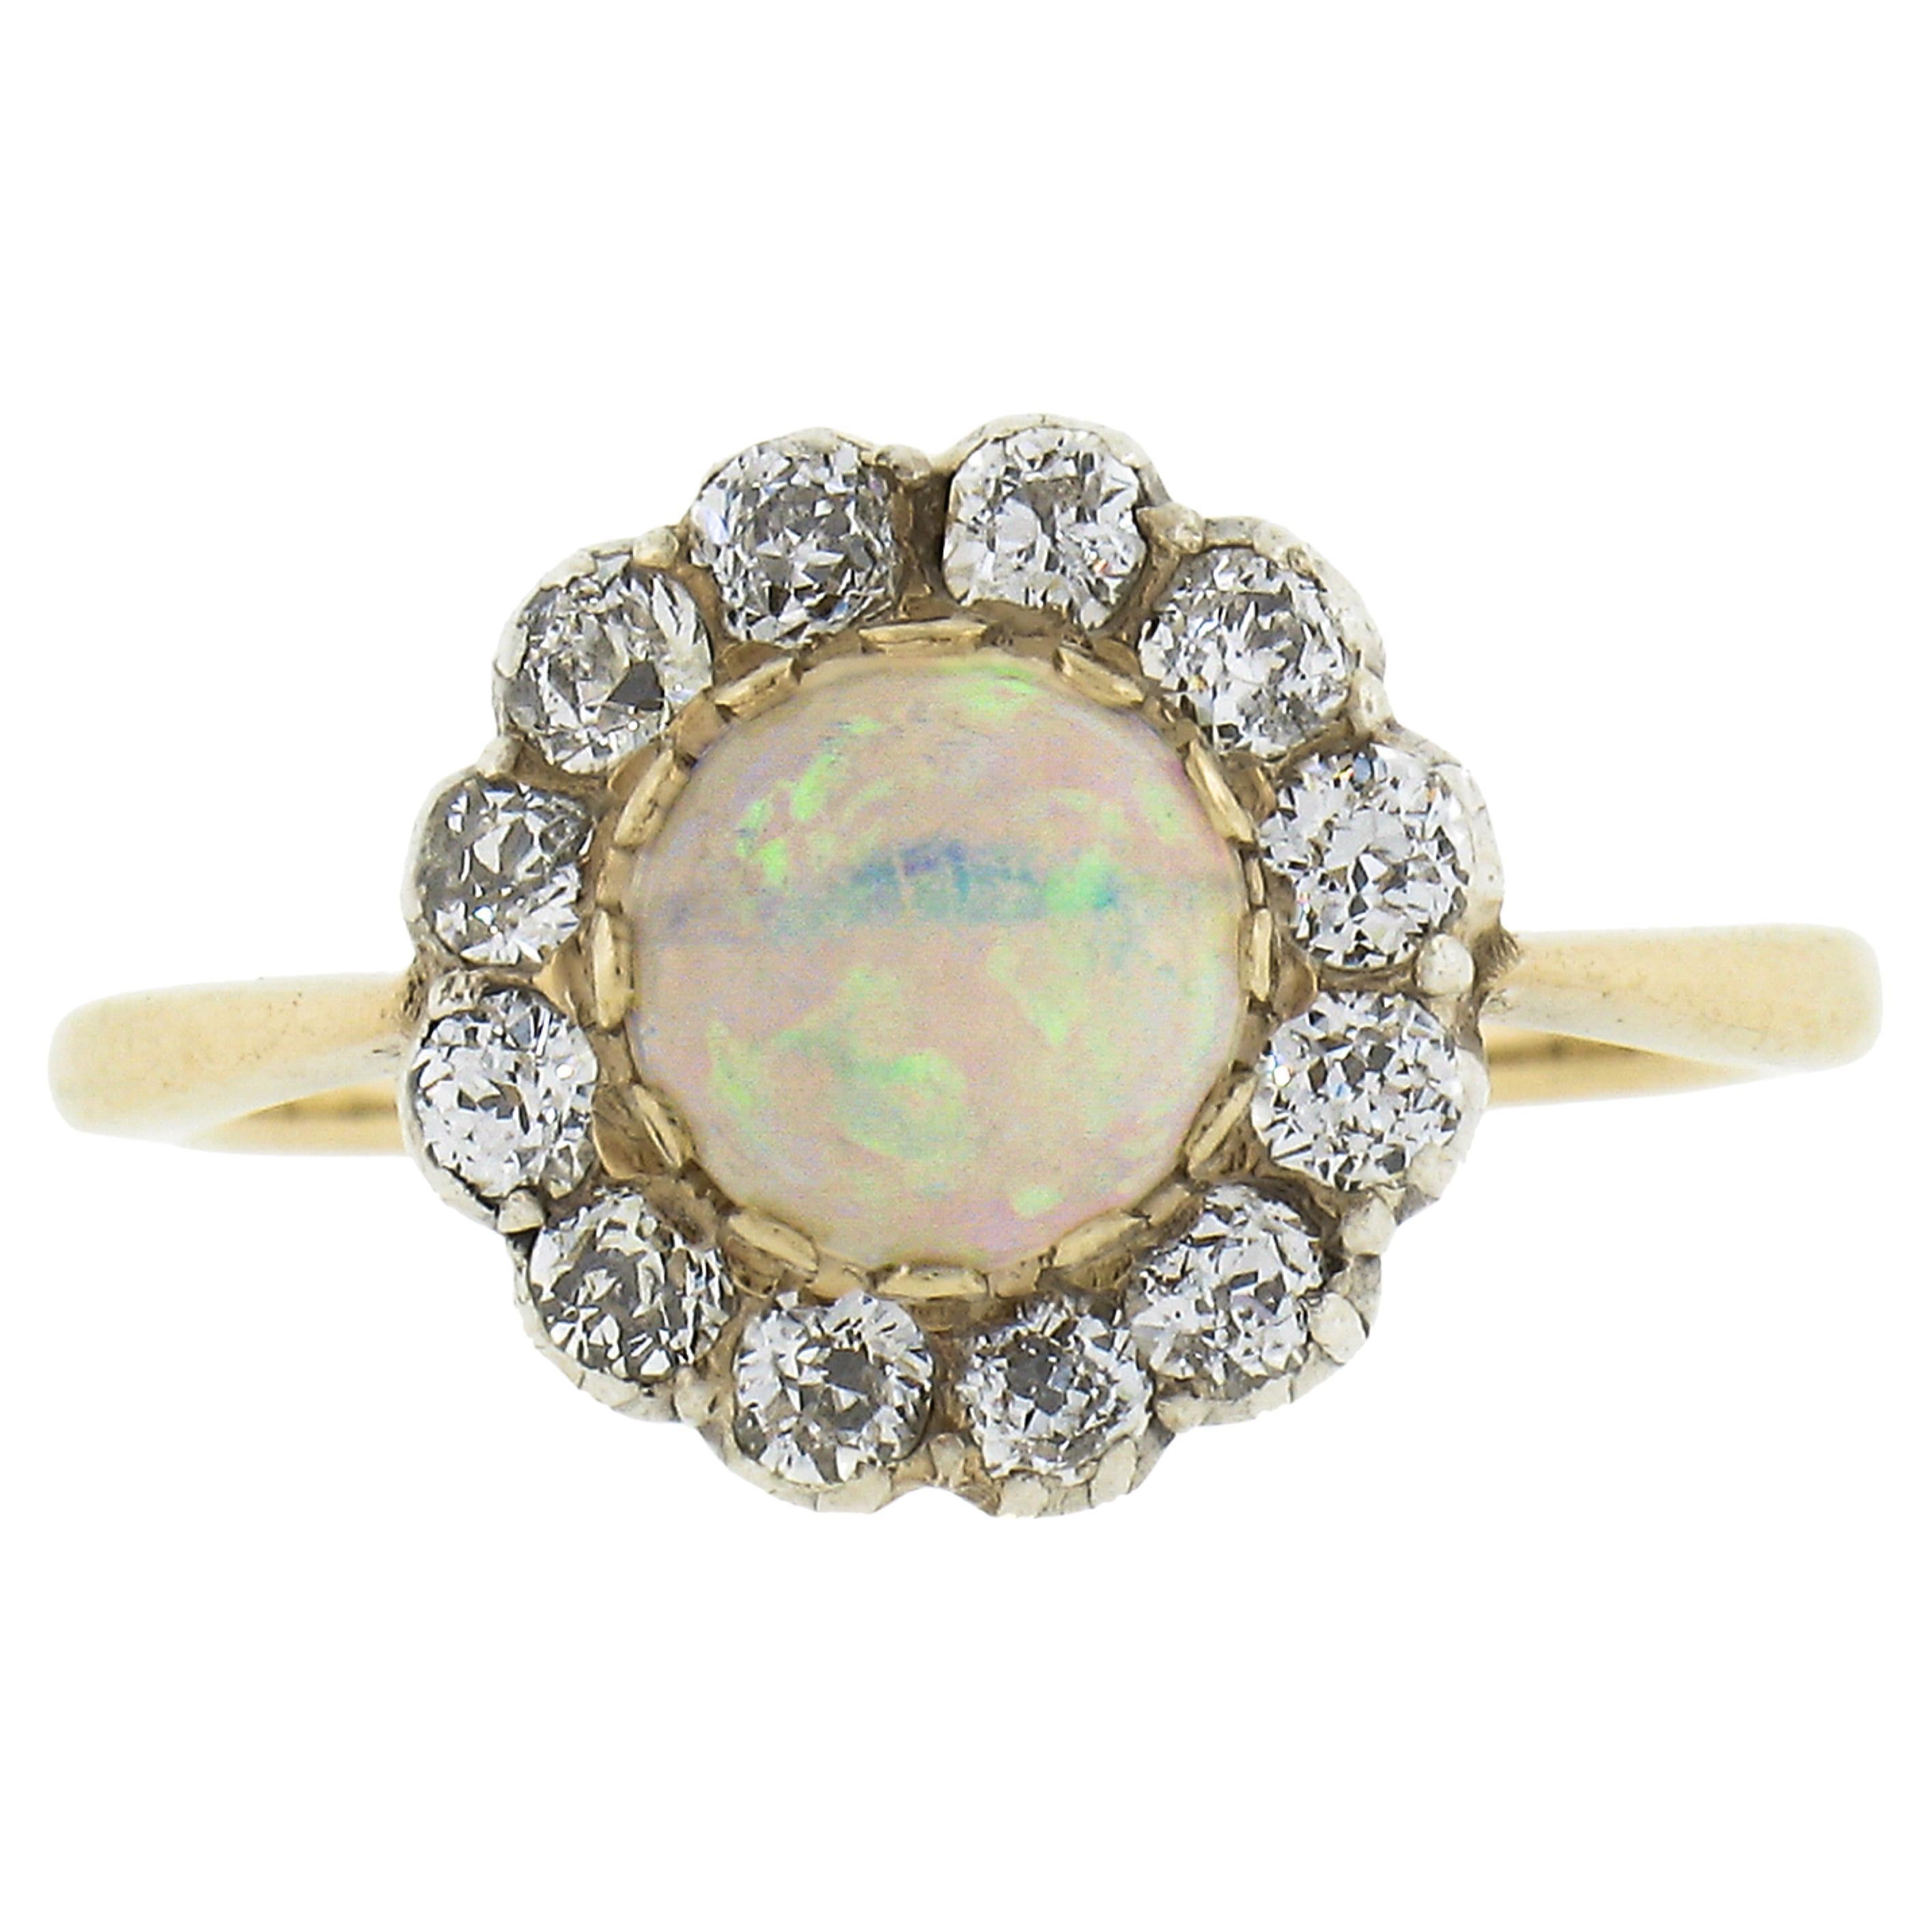 Antique Victorian 9K Gold Round Opal Solitaire w/ Old Cut Diamond Halo Ring